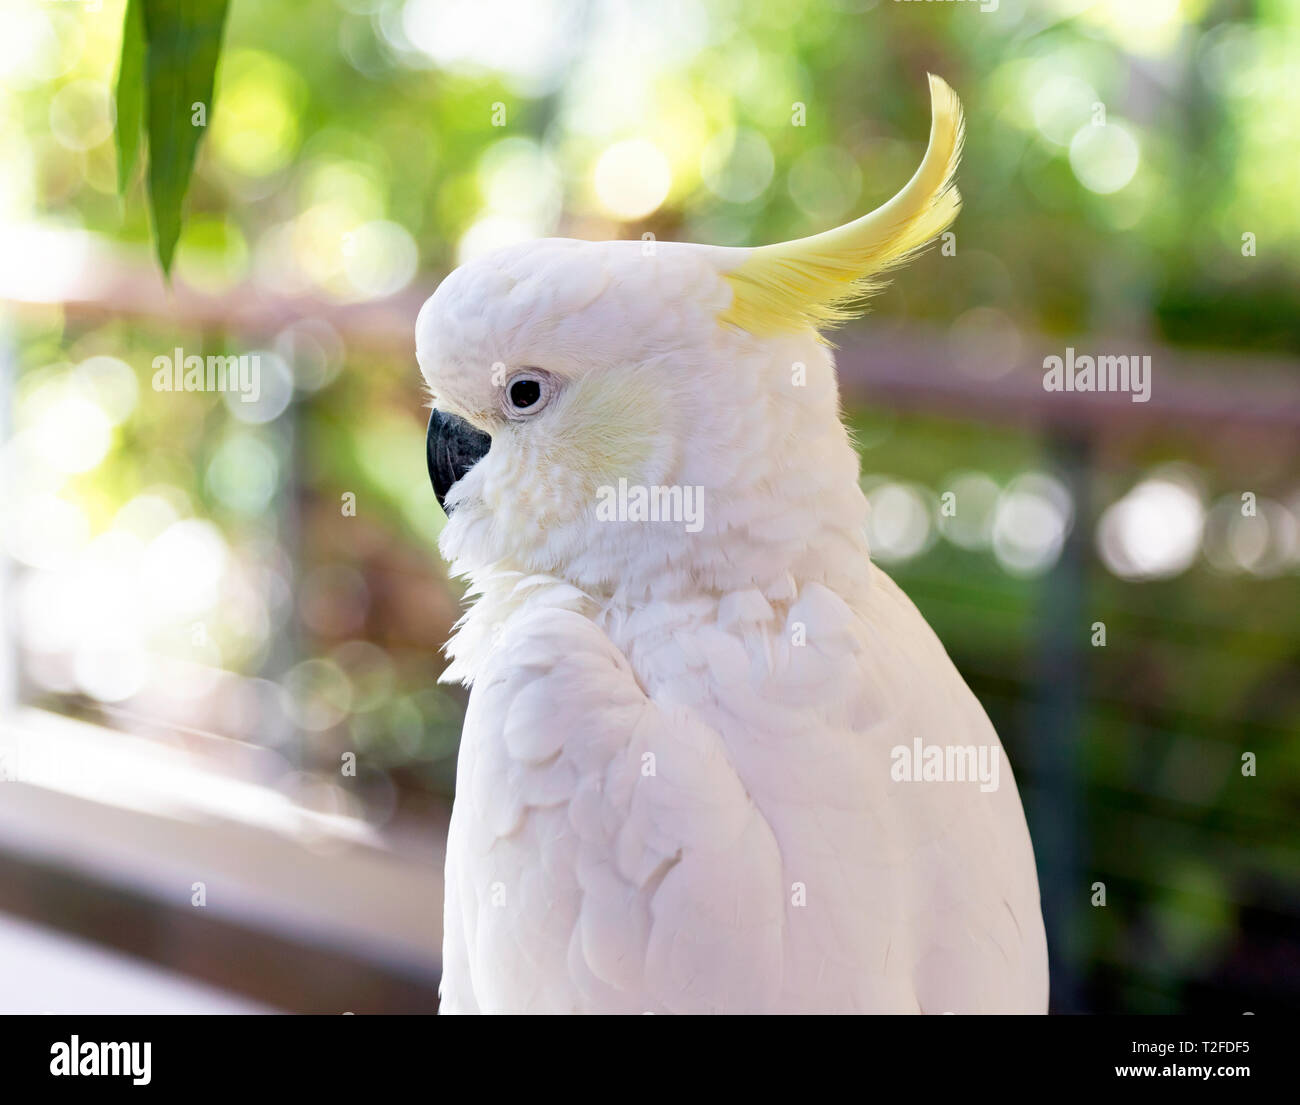 Close-up of a sulphur-crested cockatoo at Hartley's Crocodile Adventures wildlife sanctuary, Captain Cook Highway, Wangetti, Queensland, Australia. Stock Photo